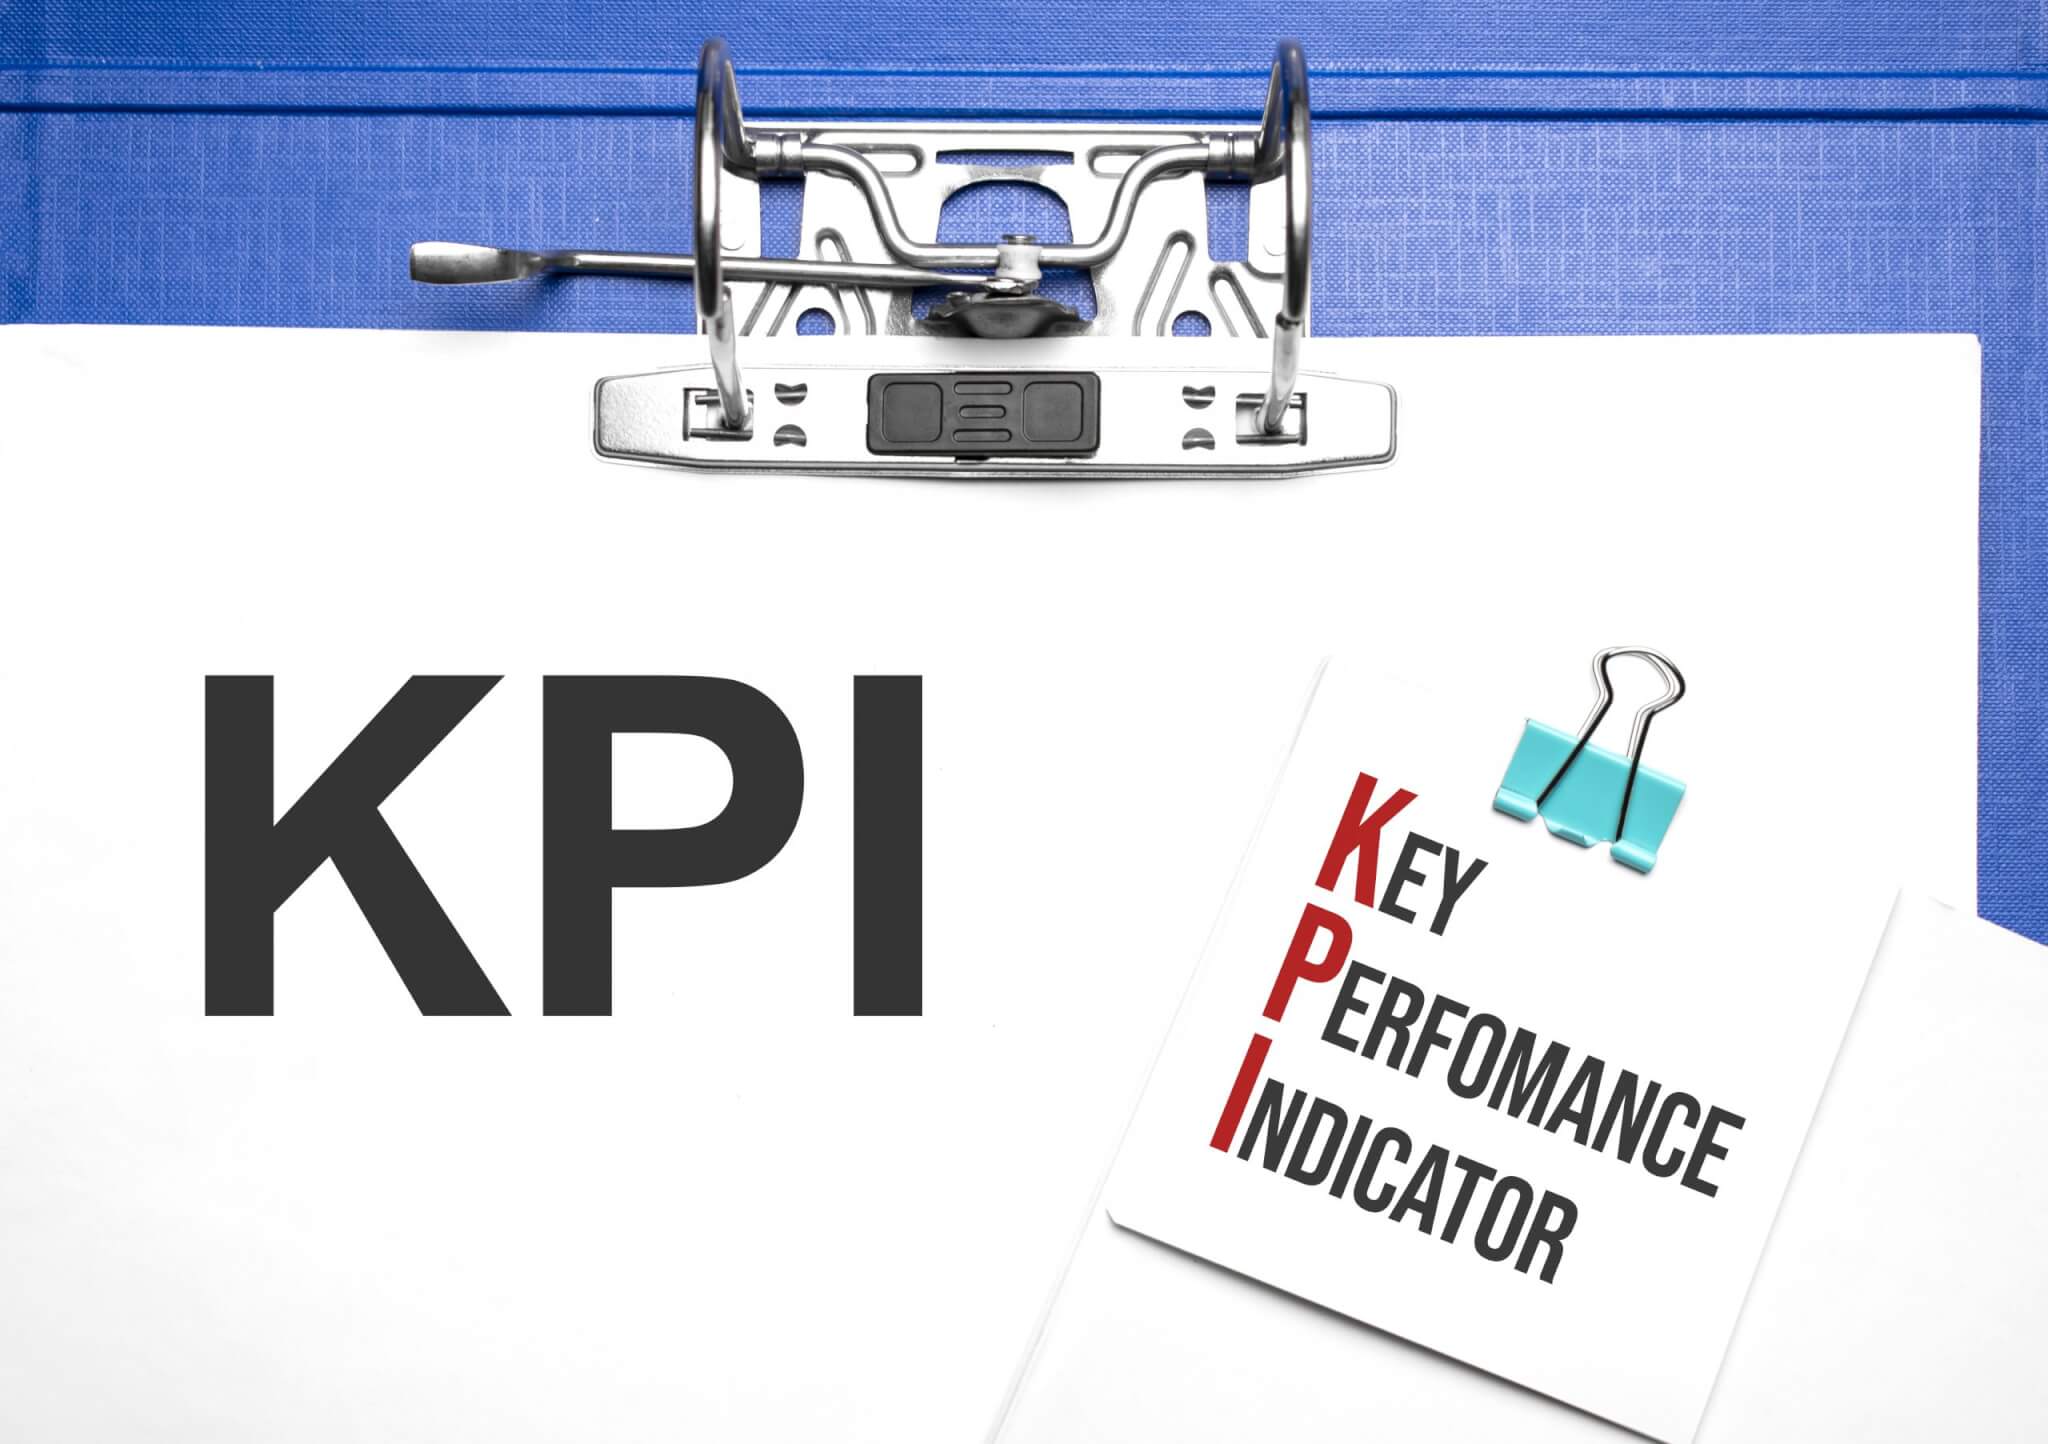 How do I find the ideal KPIs for my business